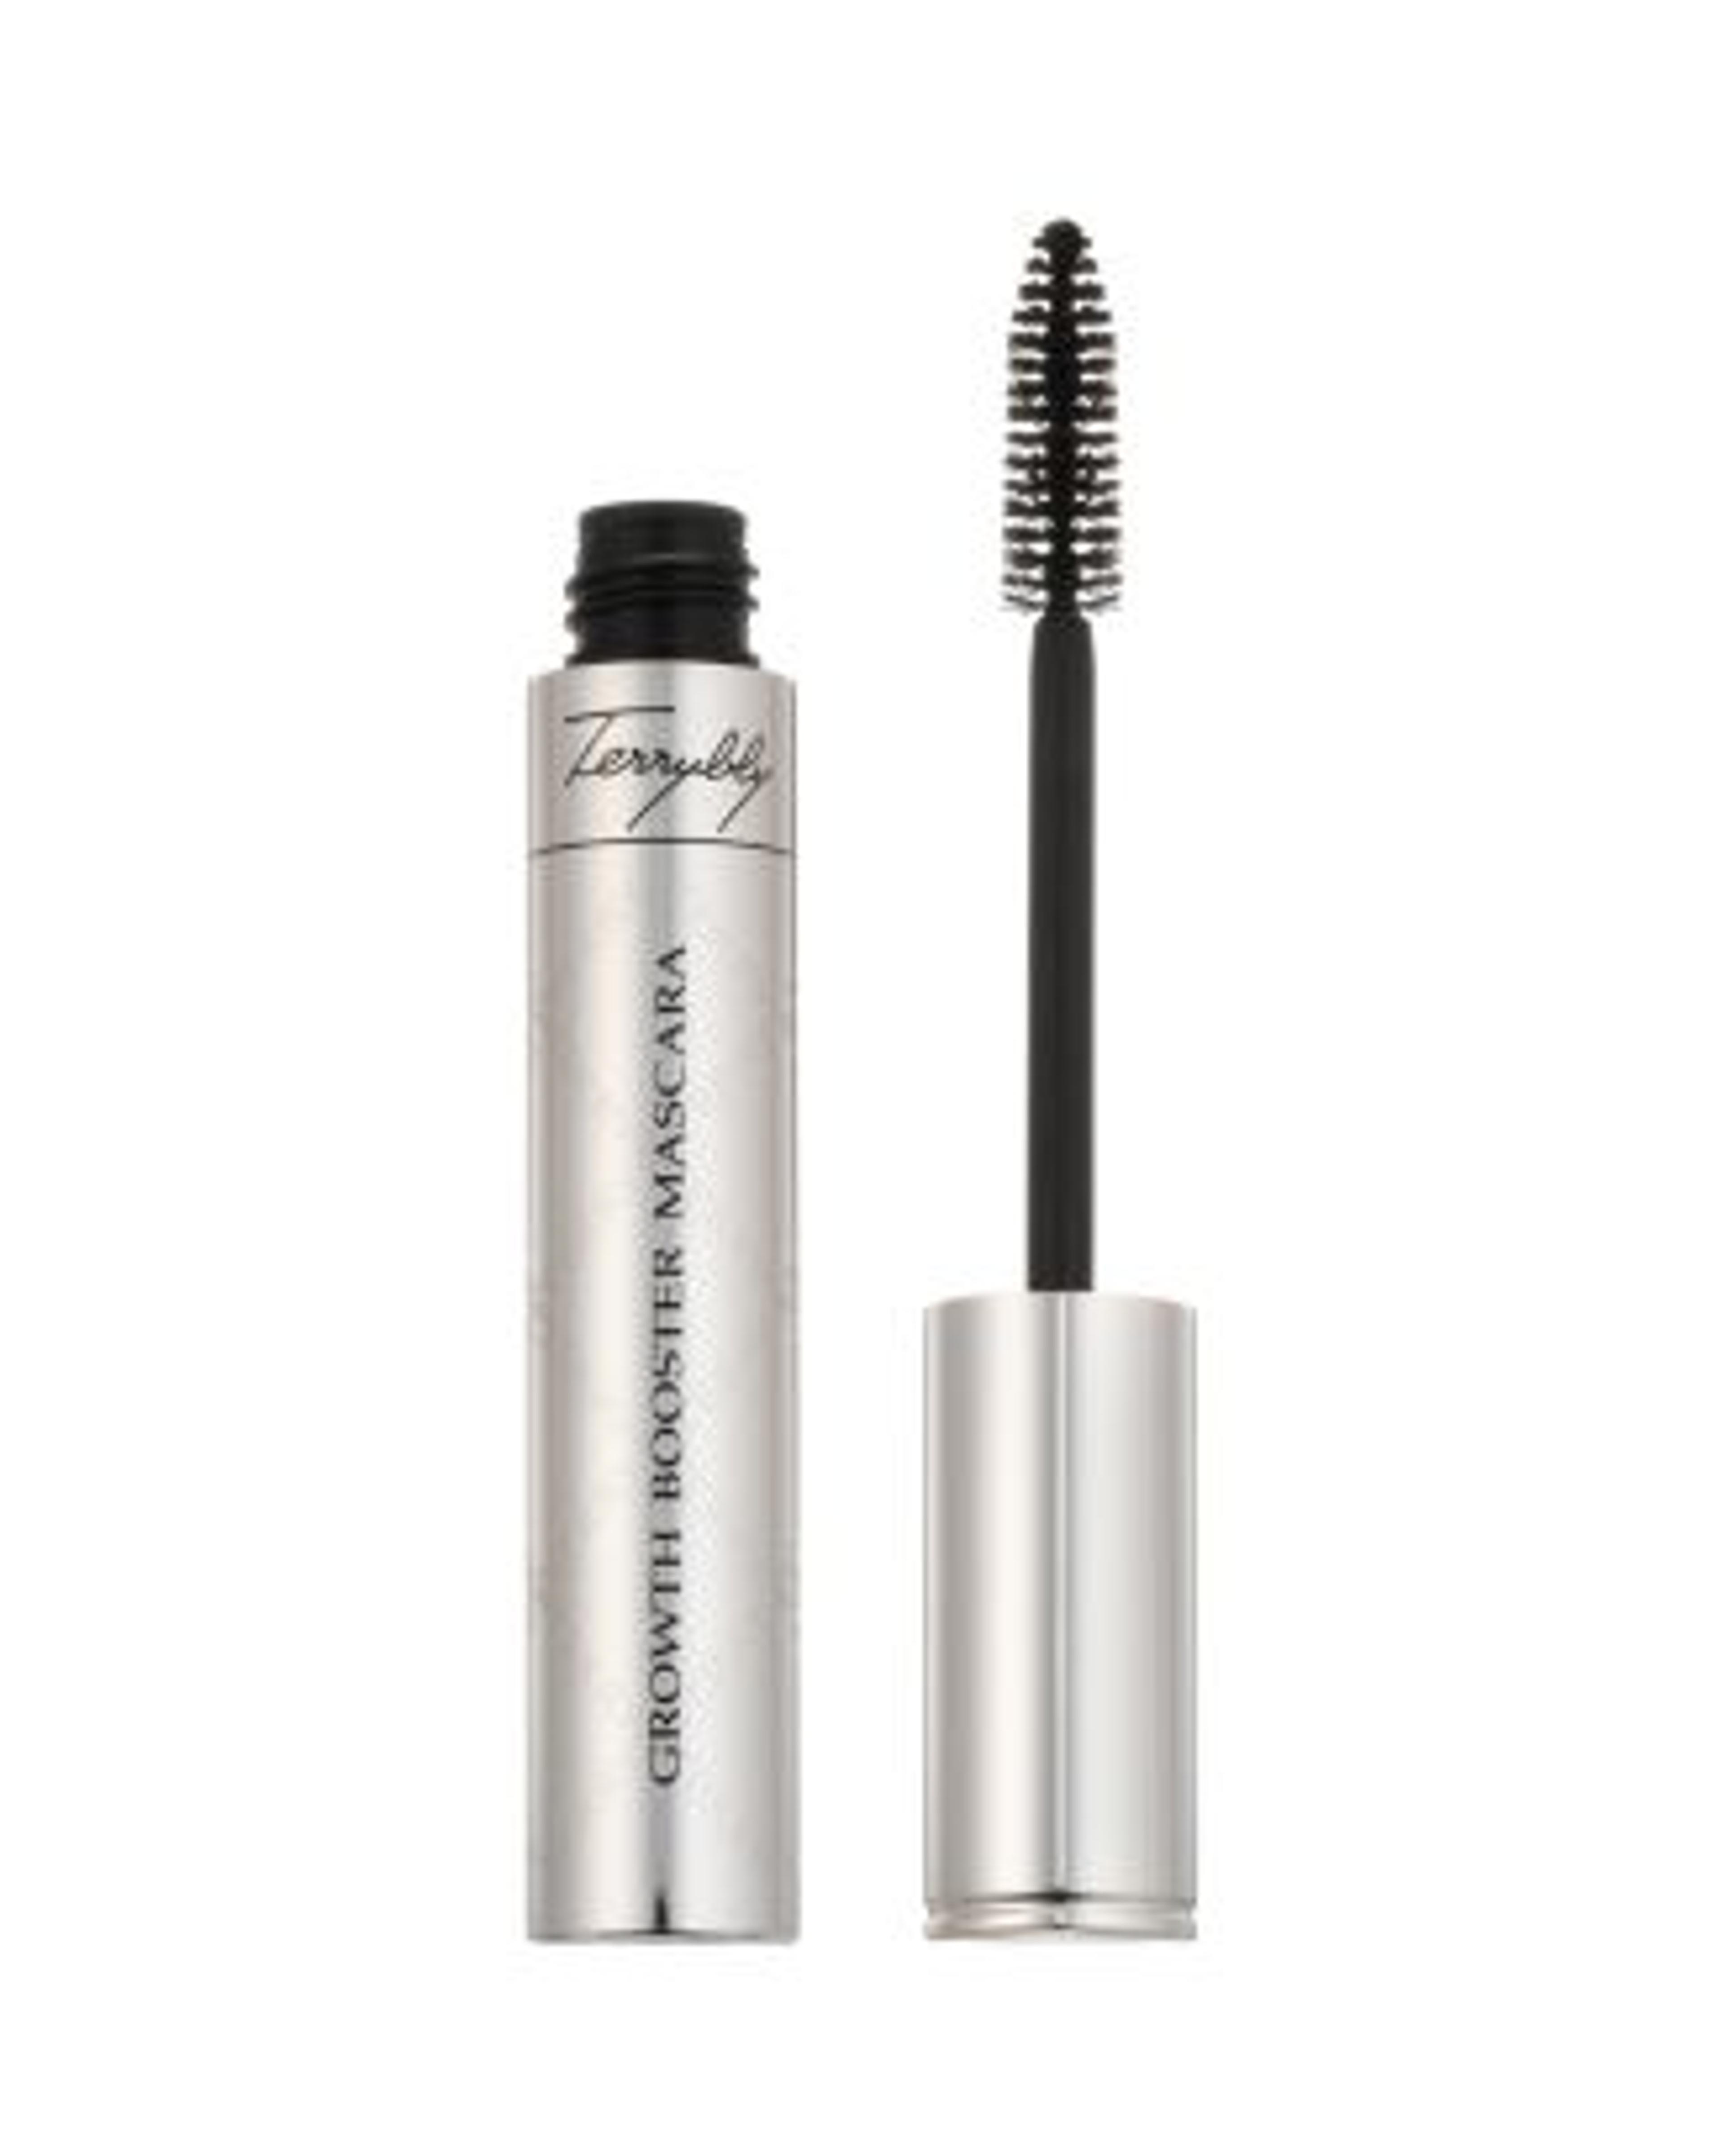 BY TERRY Terrybly Growth Booster Mascara | Bloomingdale's